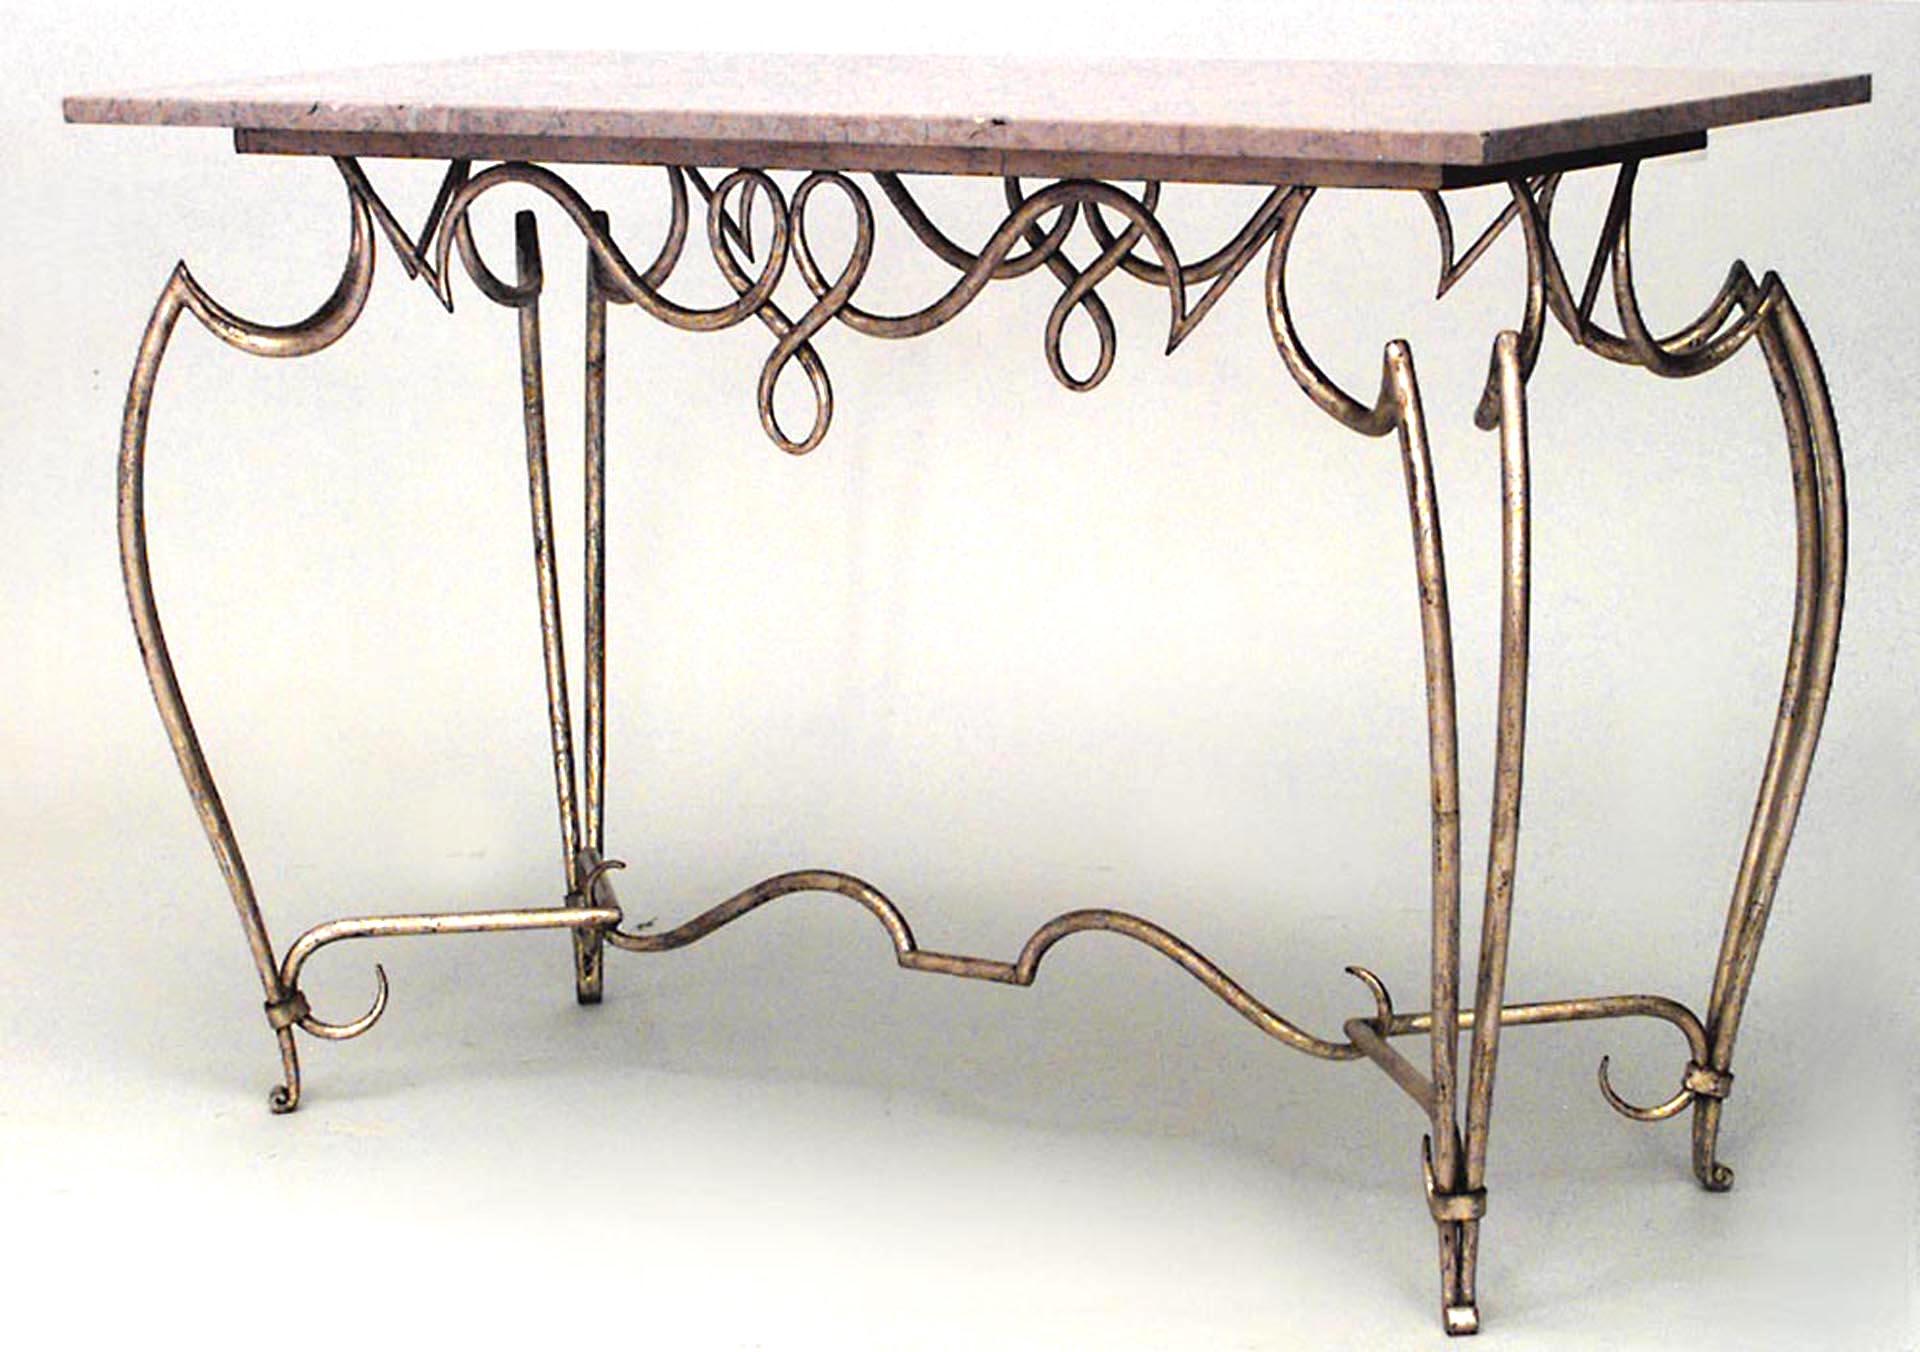 French 1940s gold painted iron center table with rectangular beige marble top above scrolling apron & legs joined by a stretcher (attributed to RENE PROU)
